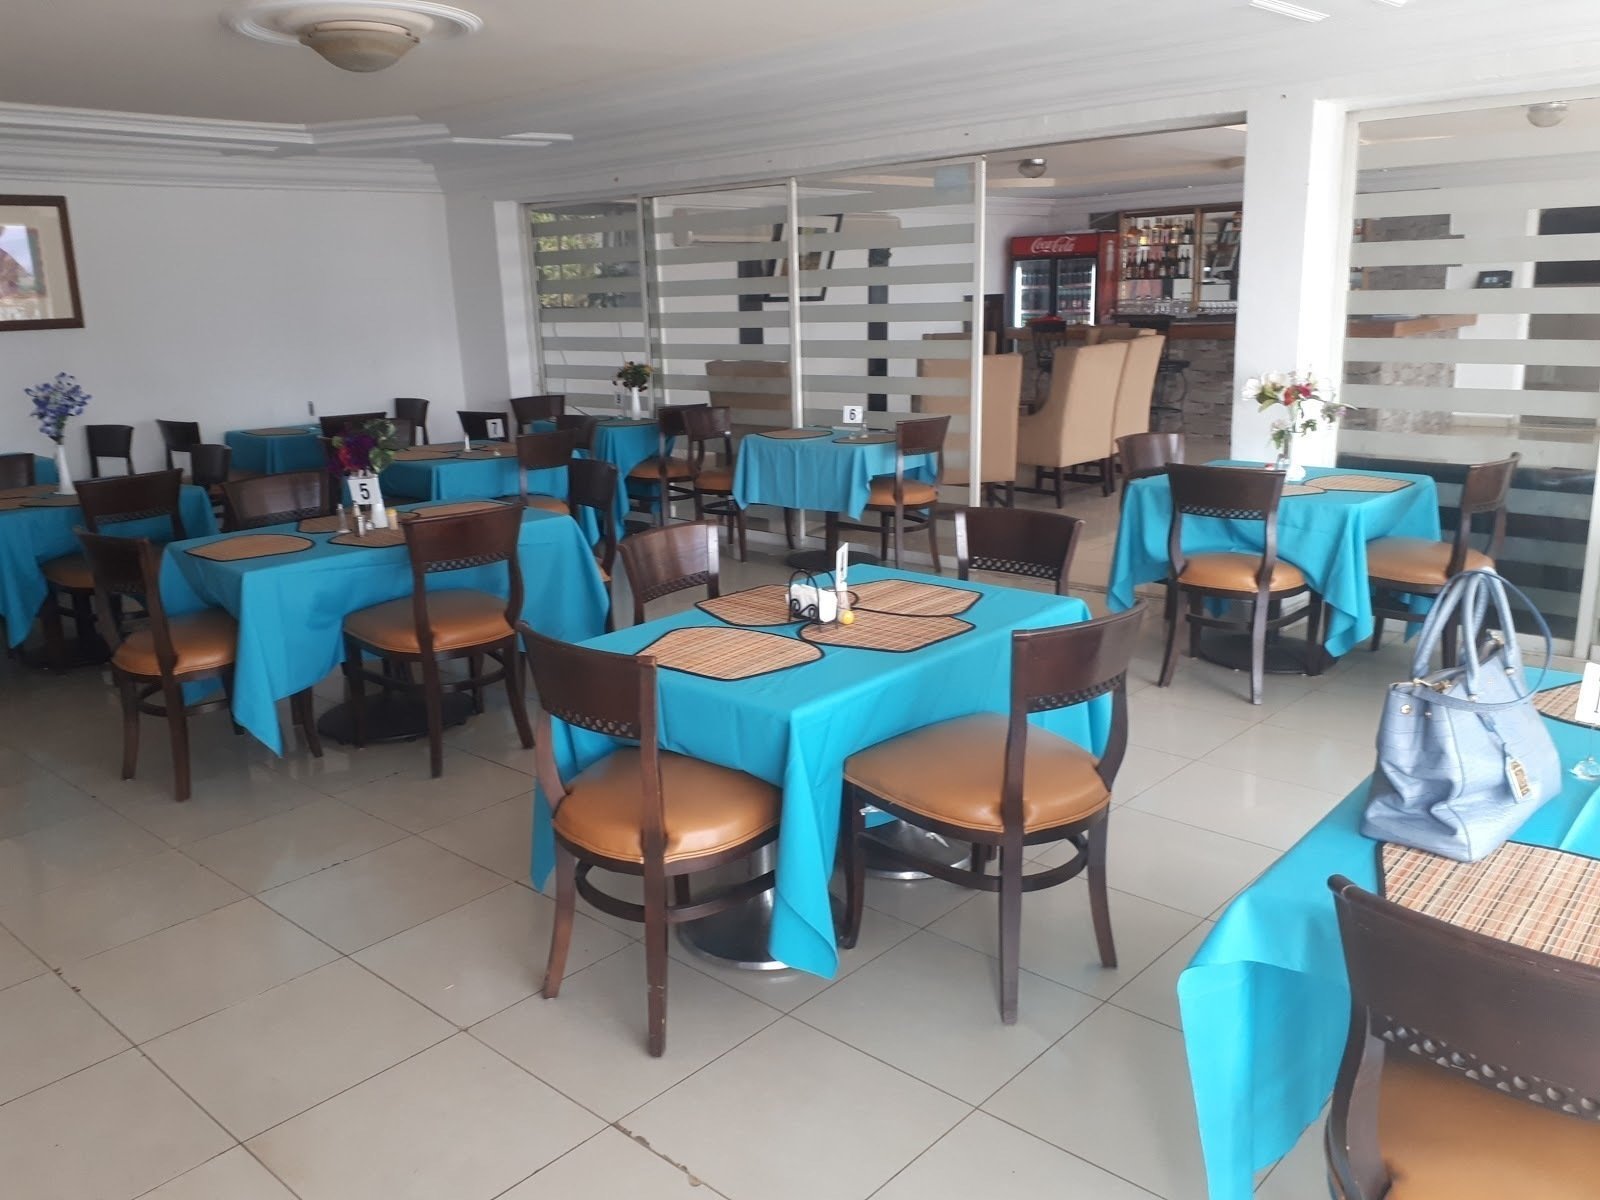 <span class="translation_missing" title="translation missing: en.meta.location_title, location_name: Hotel Cabenda, city: Freetown">Location Title</span>